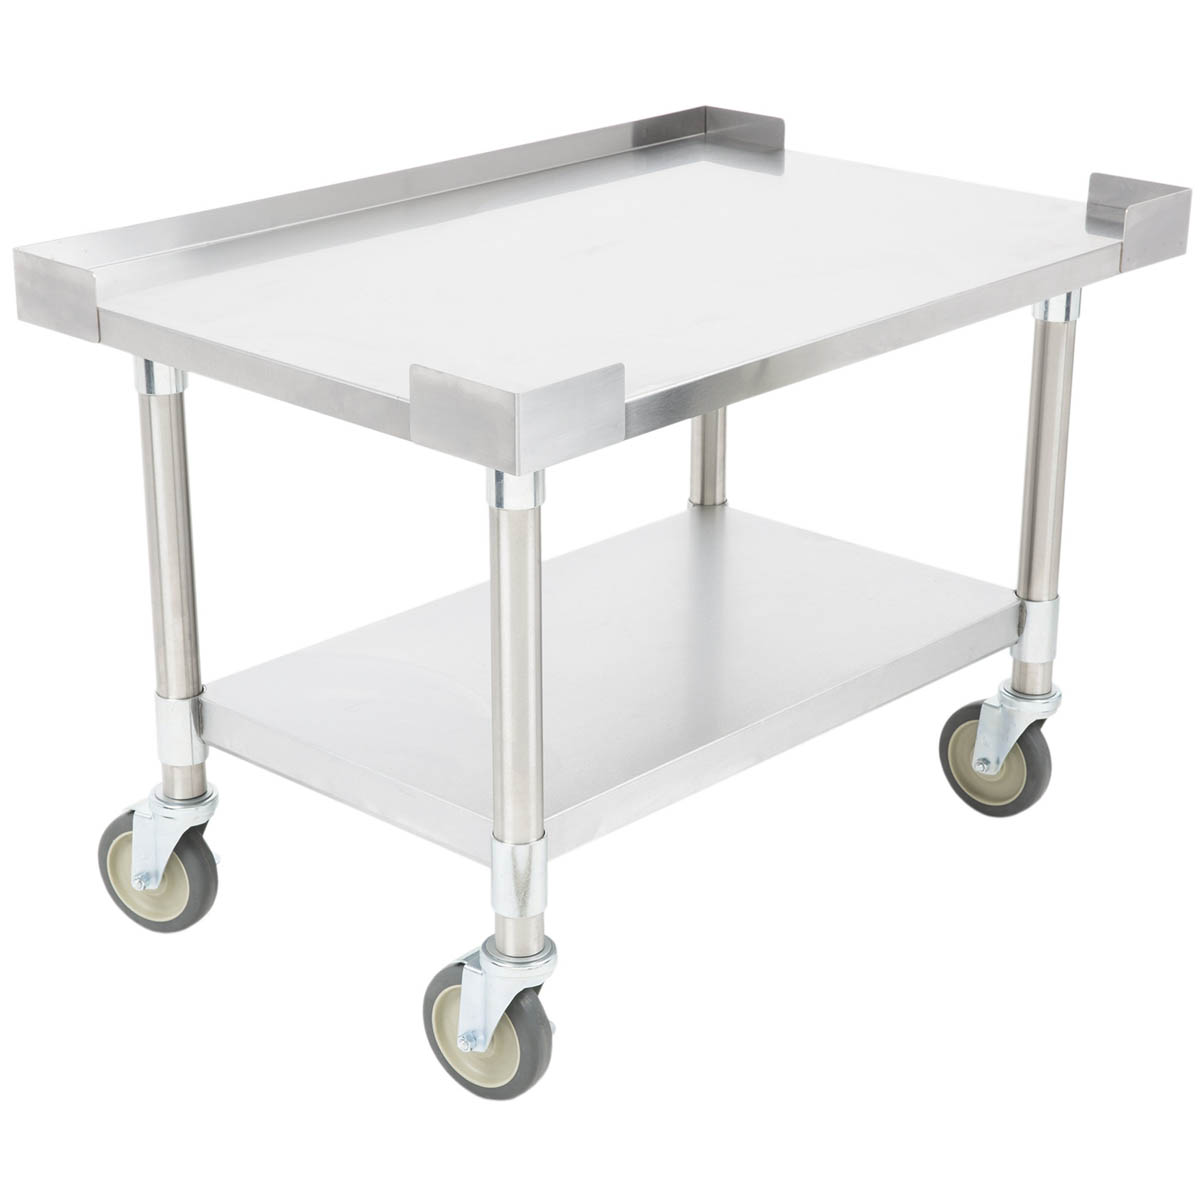 APW Wyott SSS-24L Countertop Cooking Equipment Stand w/ 24